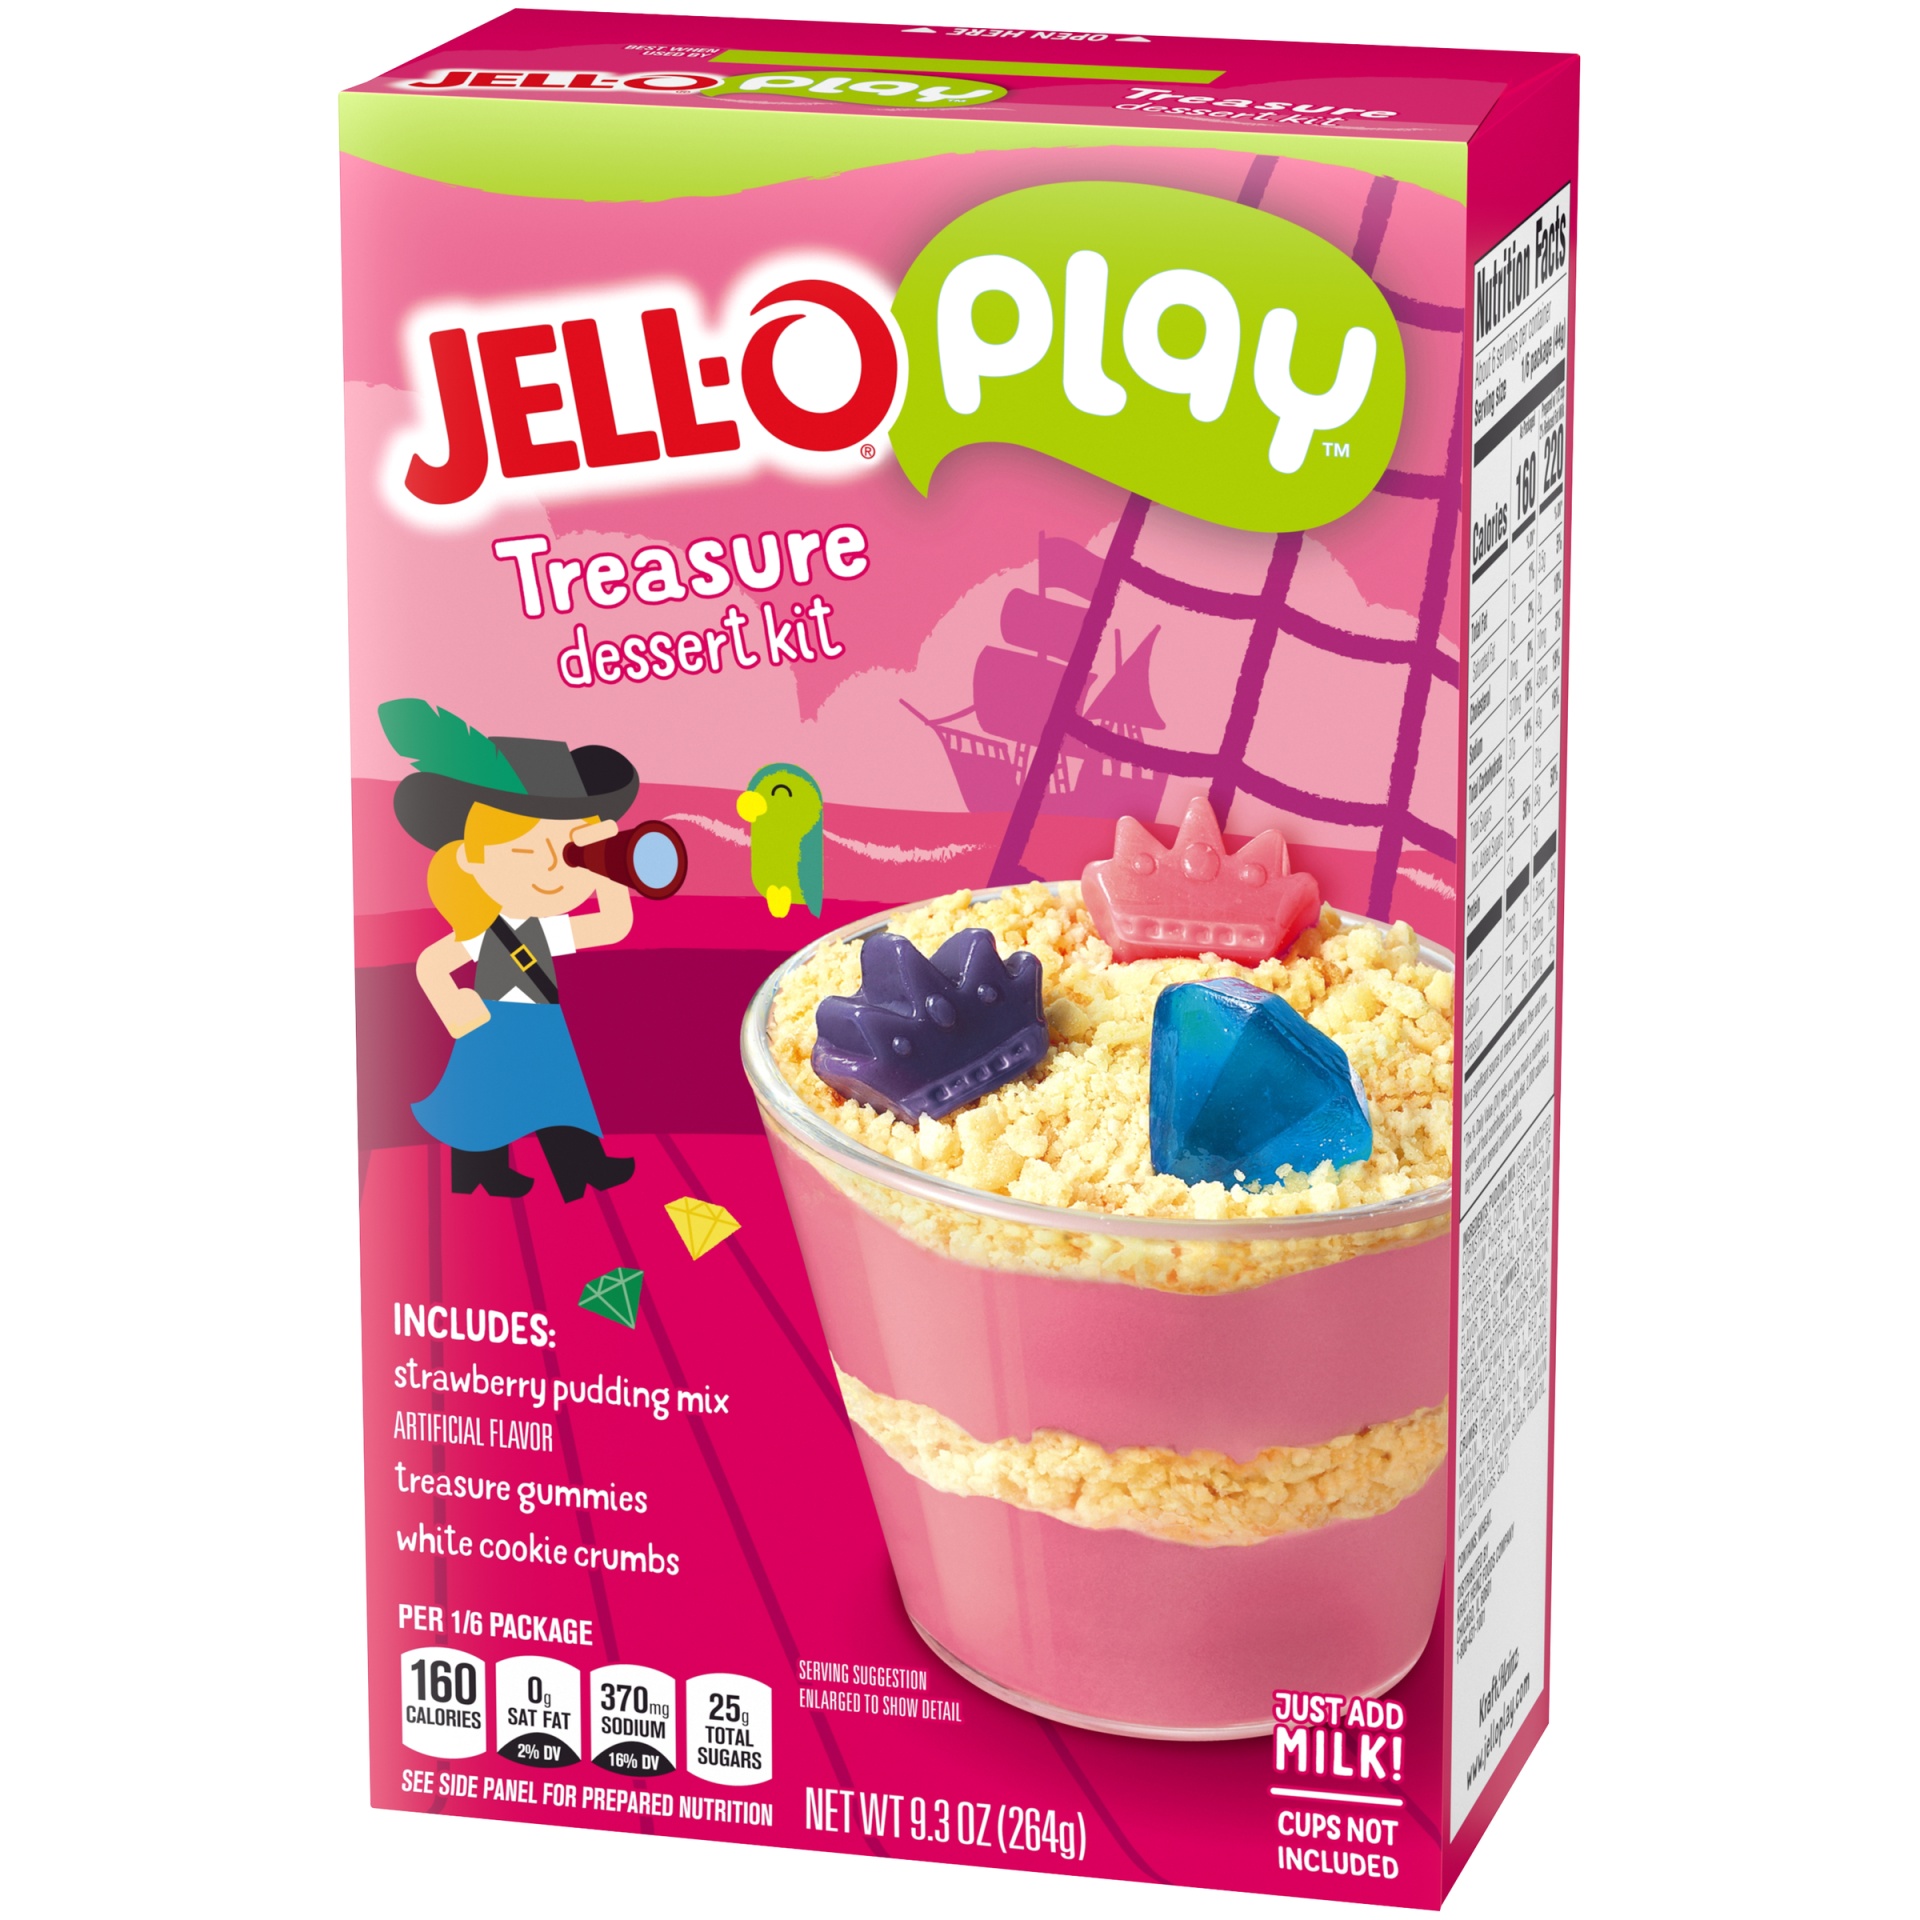 slide 3 of 6, Jell-O Play Treasure Dessert Kit with Strawberry Pudding Mix, Treasure Gummies & White Cookie Crumbs, 9.3 oz